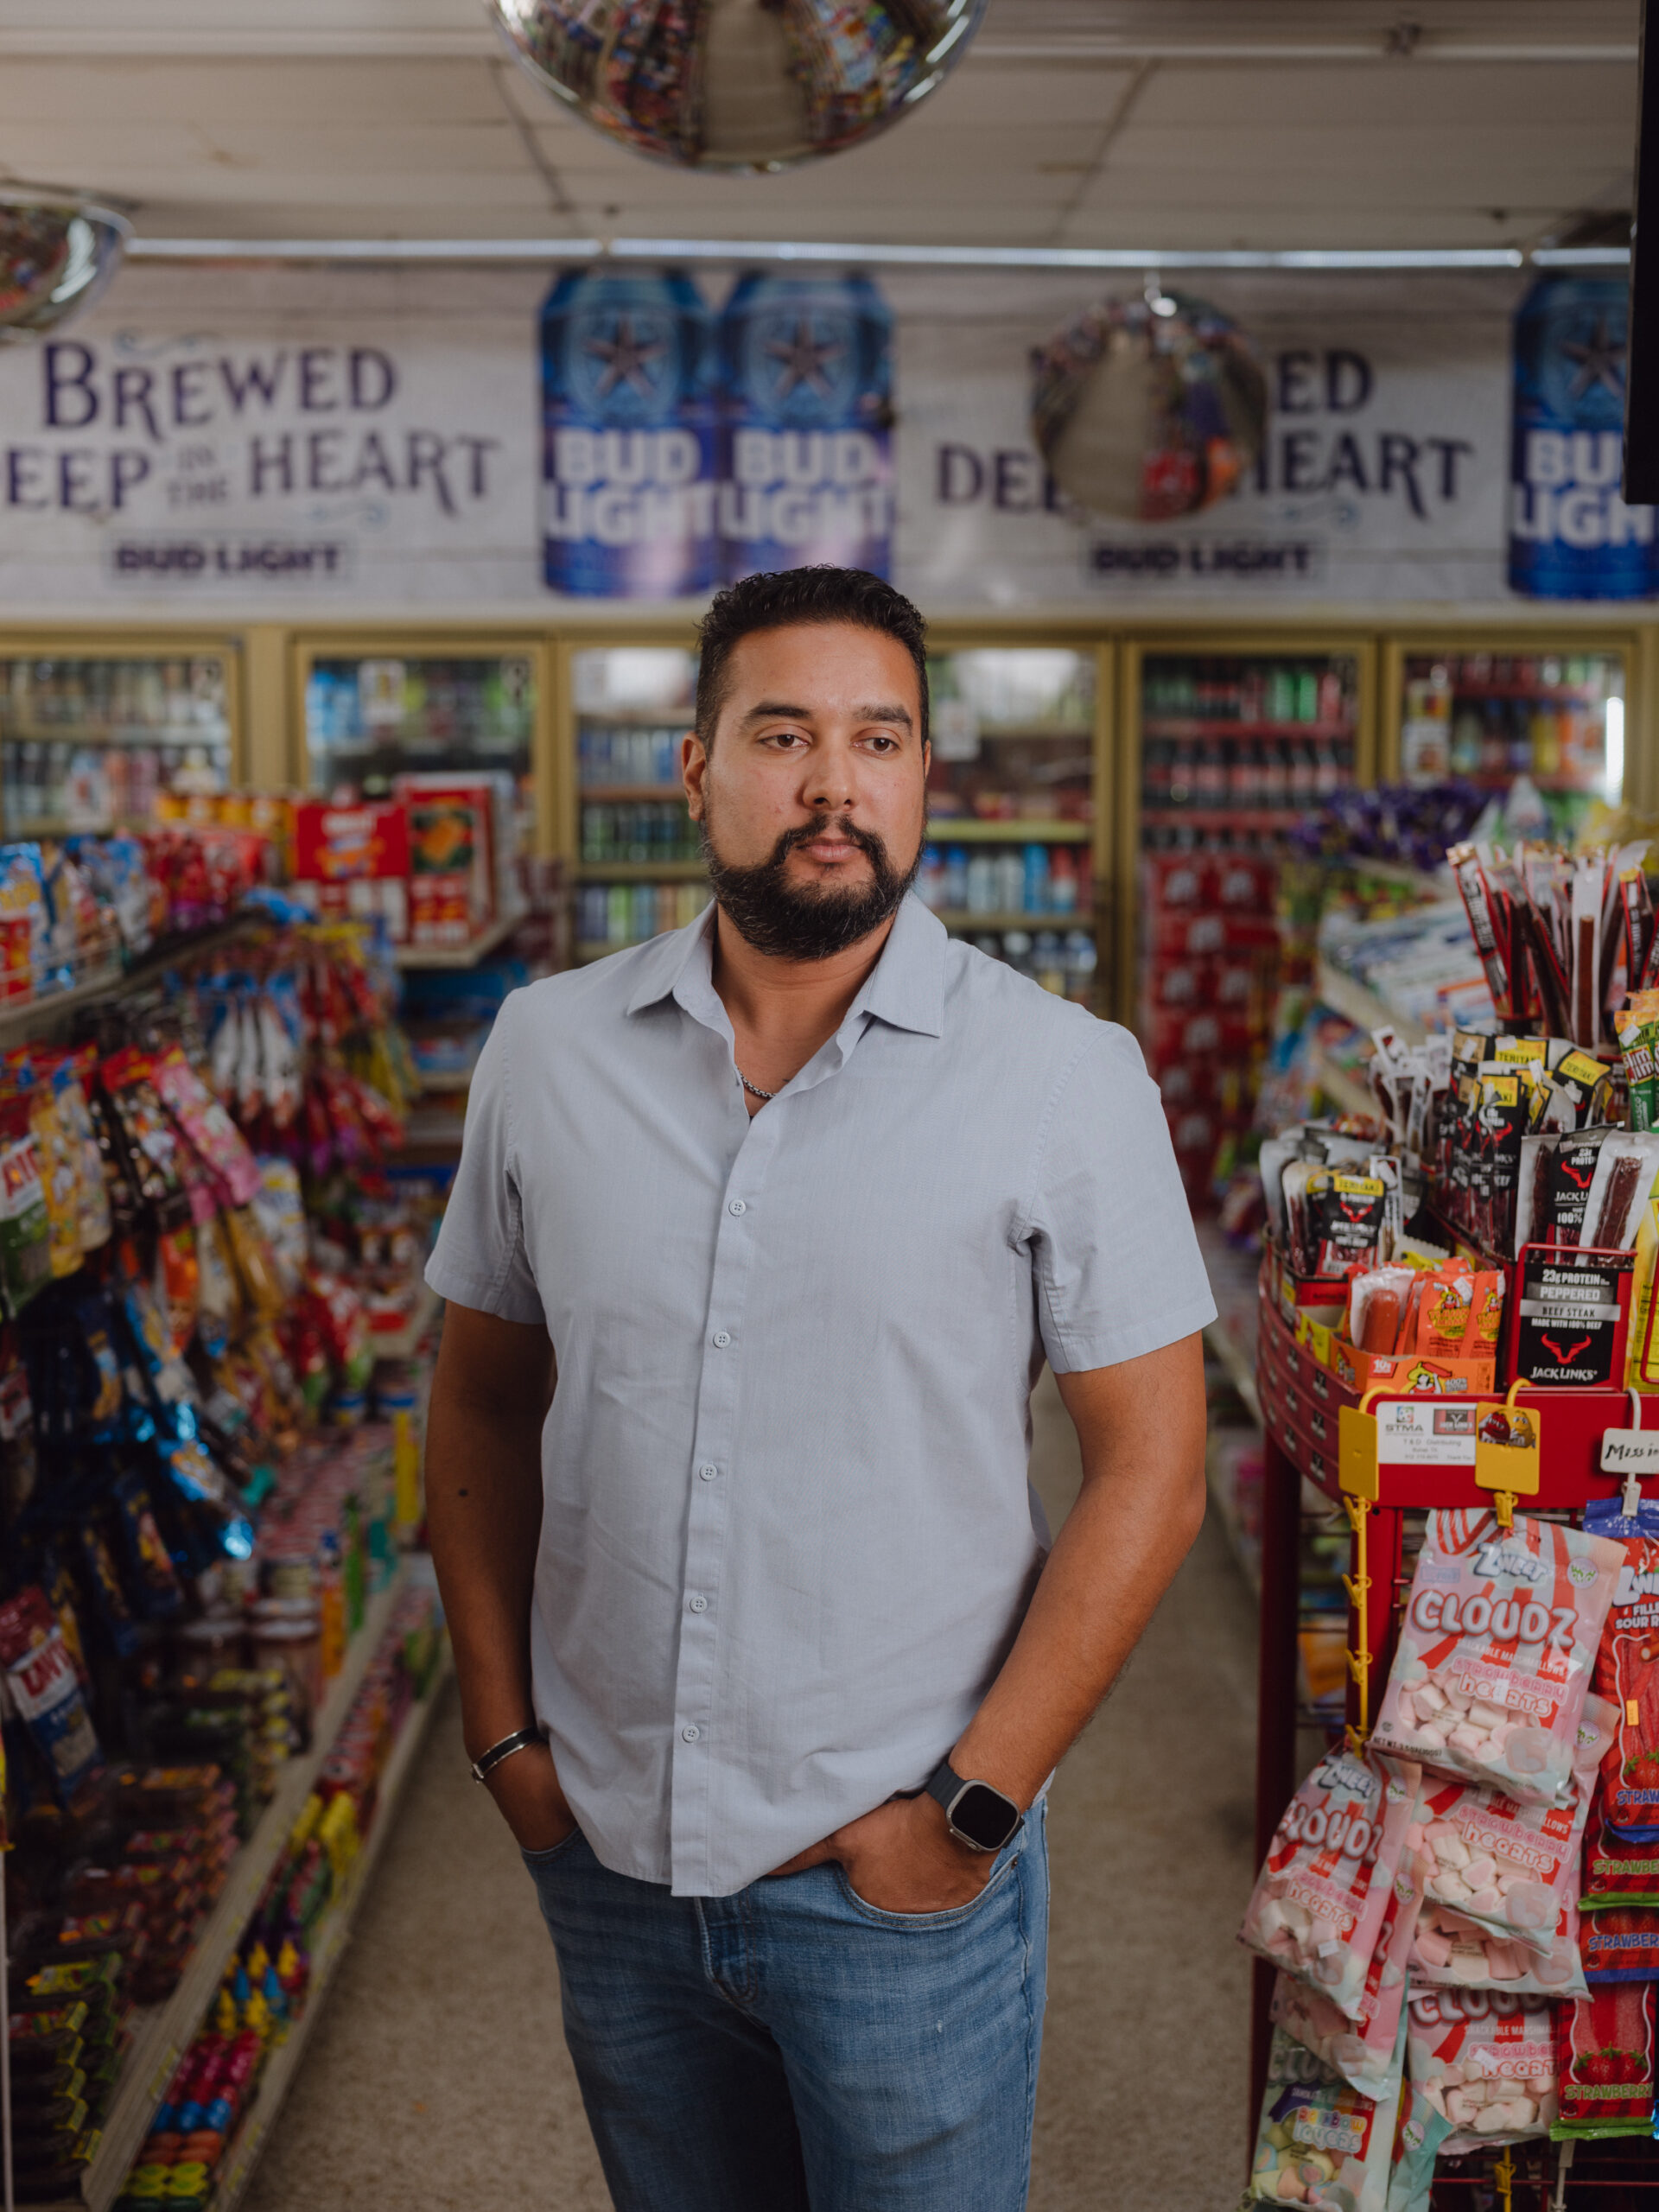 Mitesh Patel, in jeans and a blue button down, poses in an aisle of the convenience store where his father Hasmukh was murdered by Christopher Young.